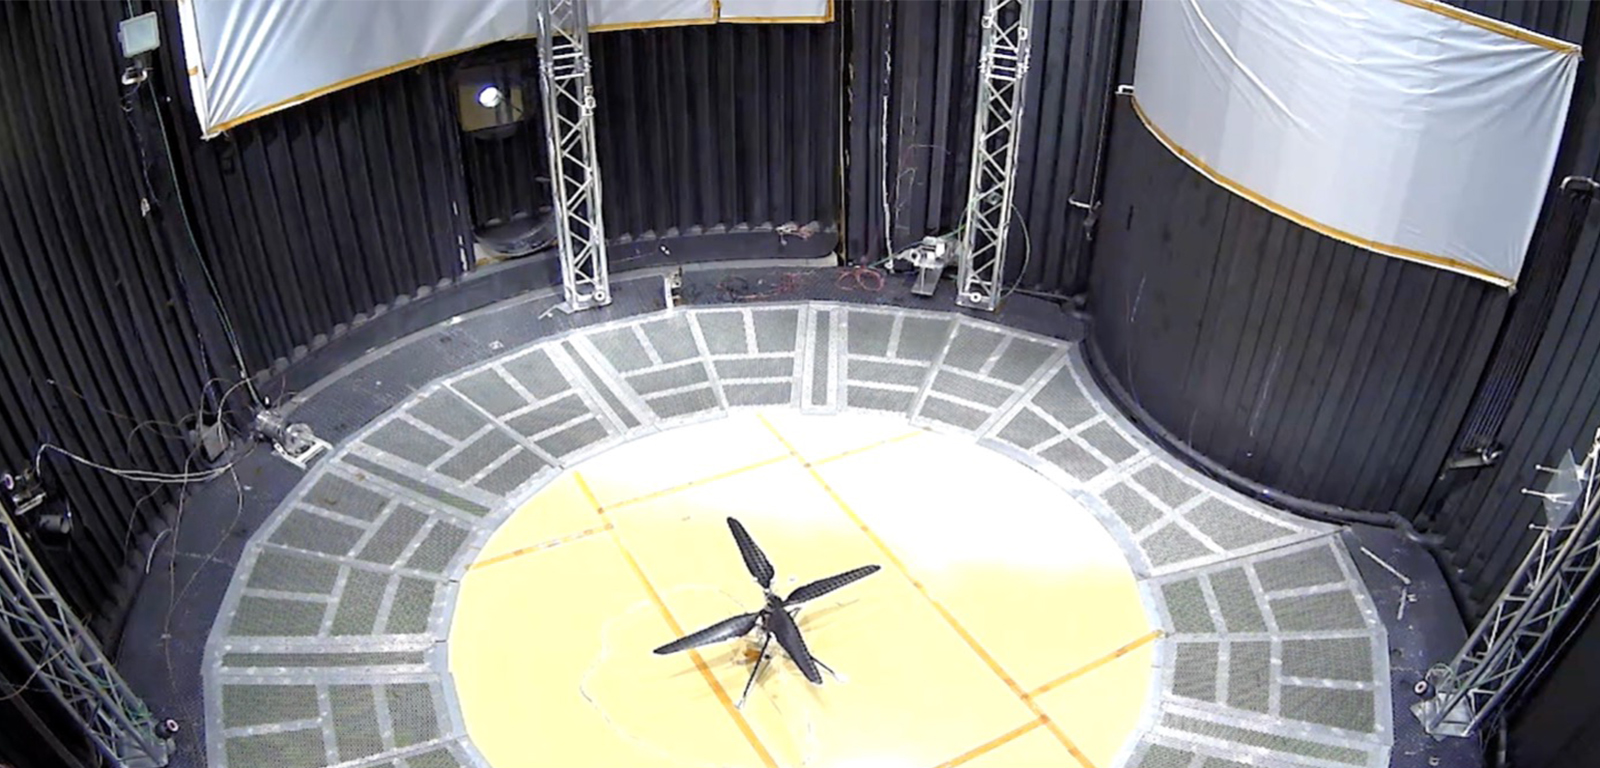 This image shows a test flight of a full-scale prototype of the Ingenuity Mars Helicopter within a chamber at the Space Simulator Facility at Jet Propulsion Laboratory.